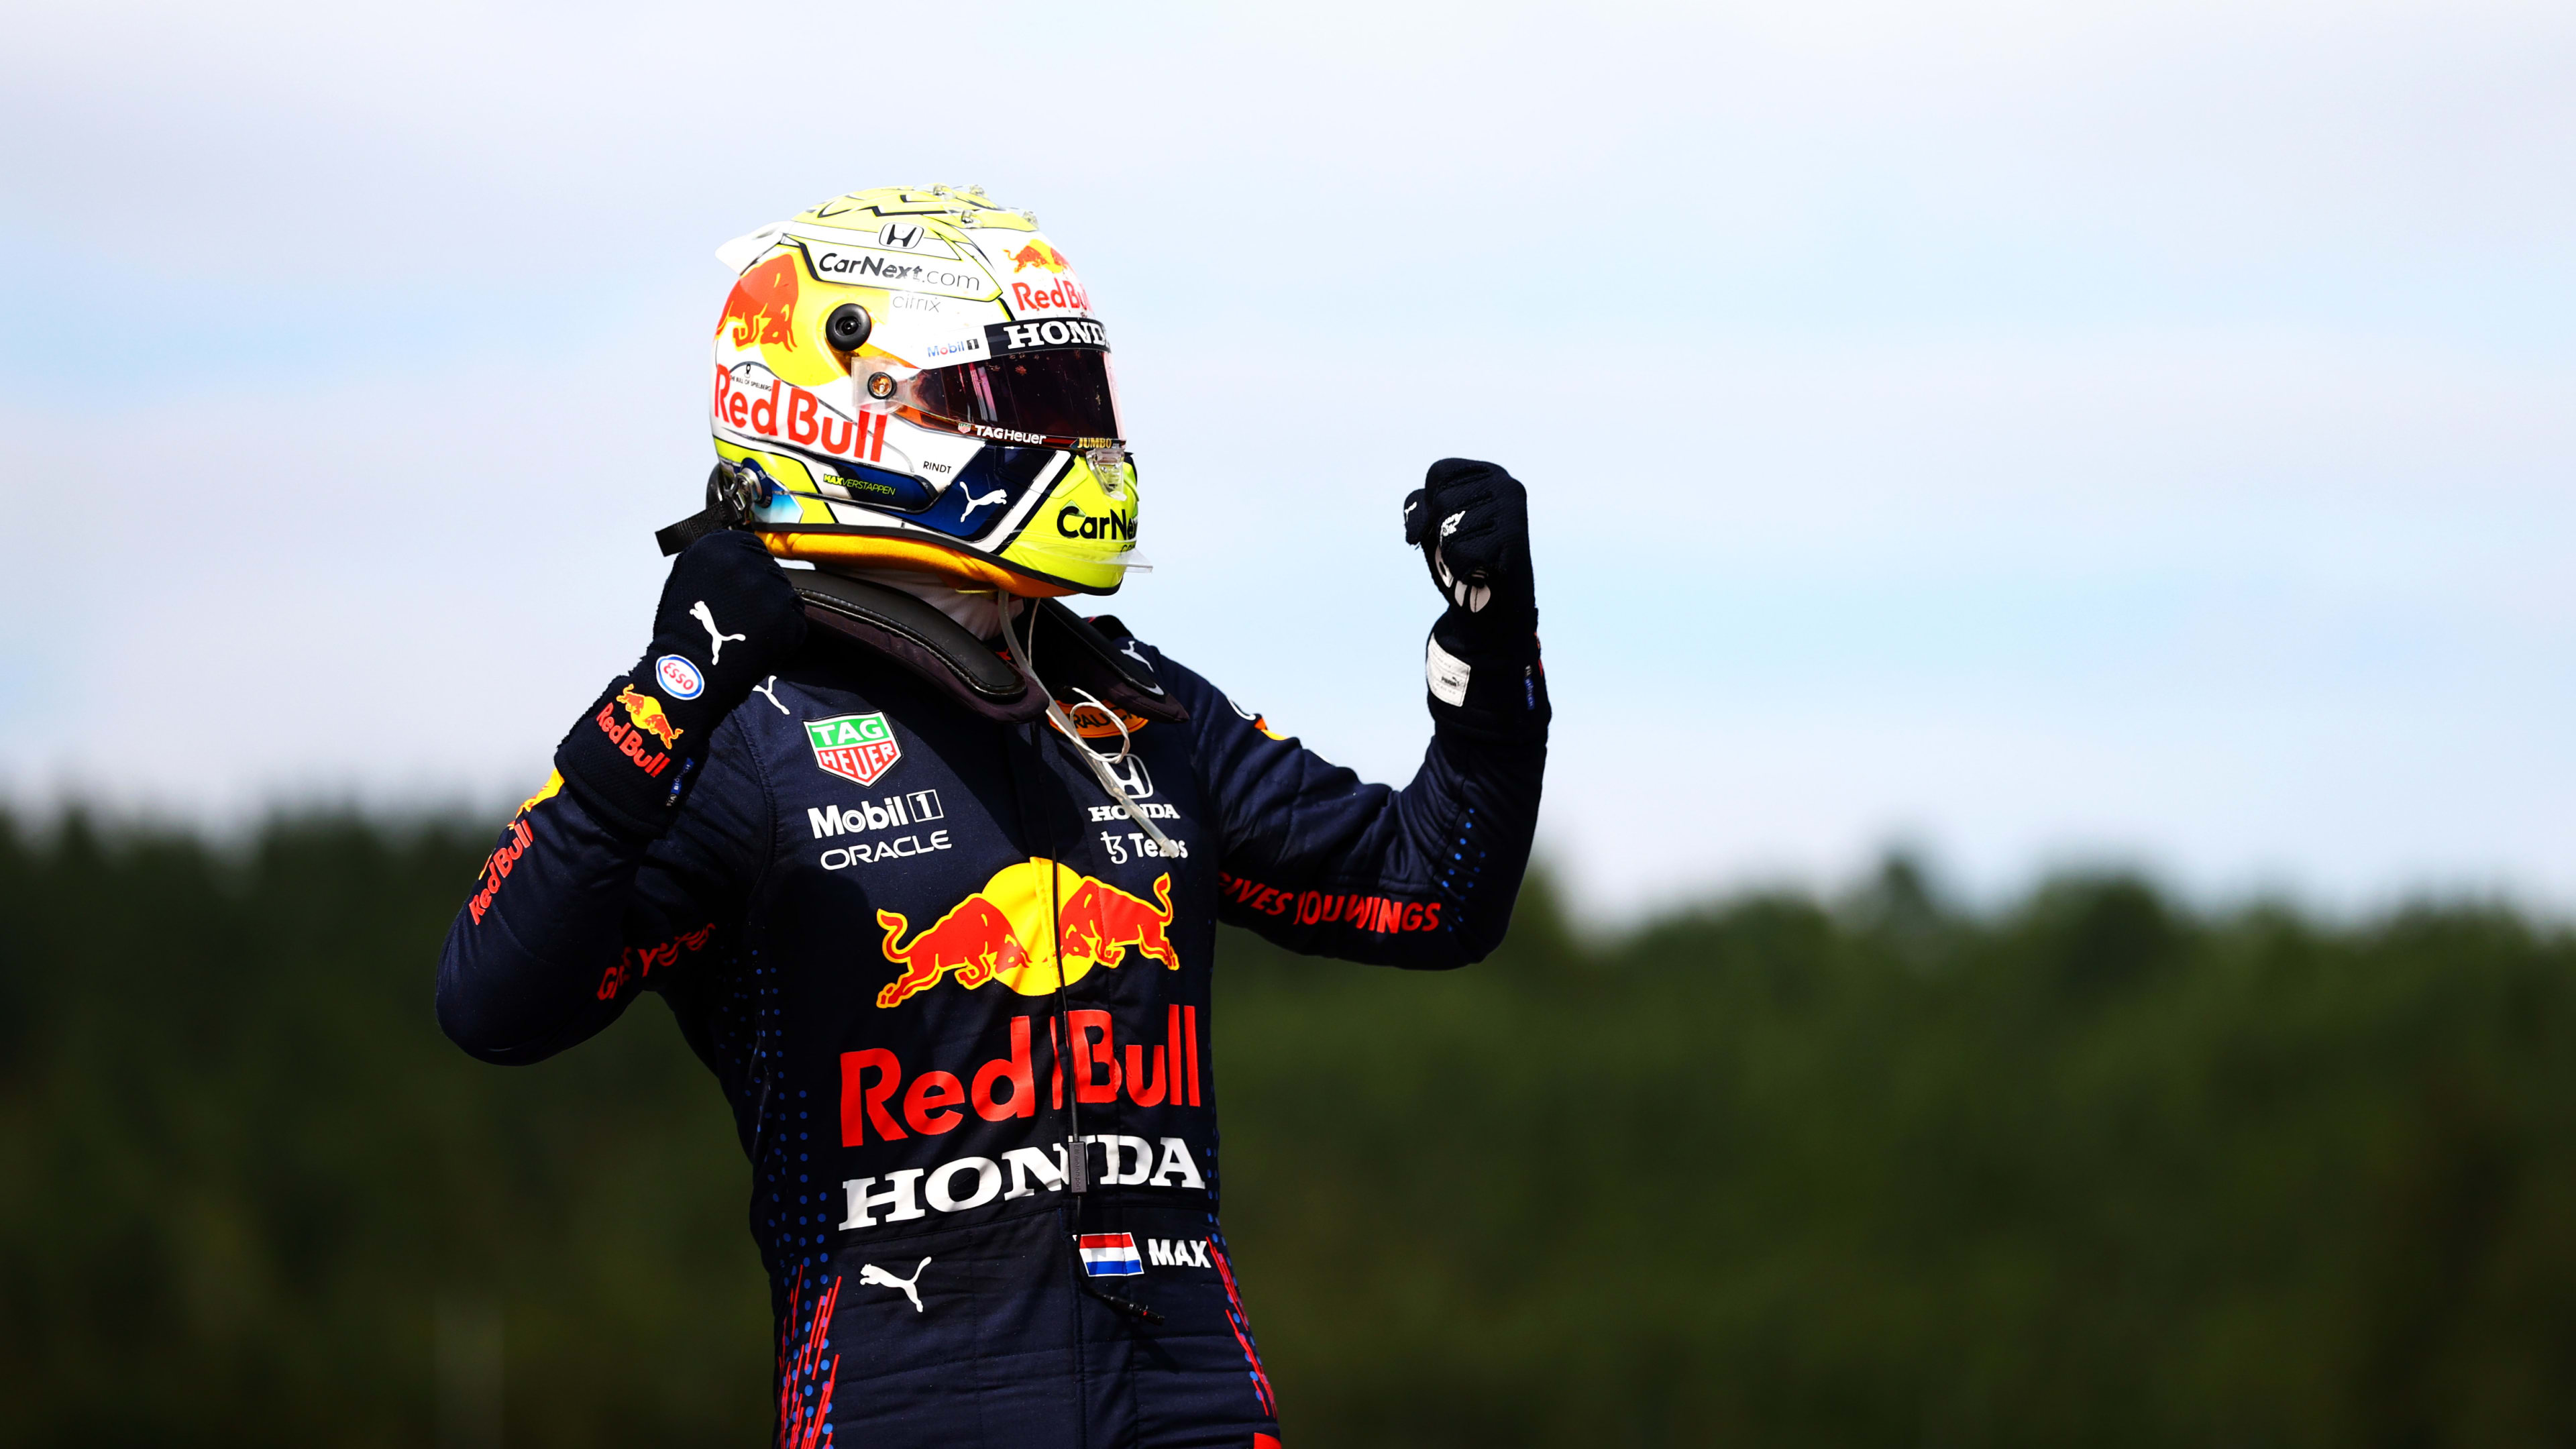 21 Austrian Grand Prix Report And Highlights Verstappen Waltzes To Second Win In A Row At Red Bull Ring As Bottas Beats Norris To P2 Formula 1